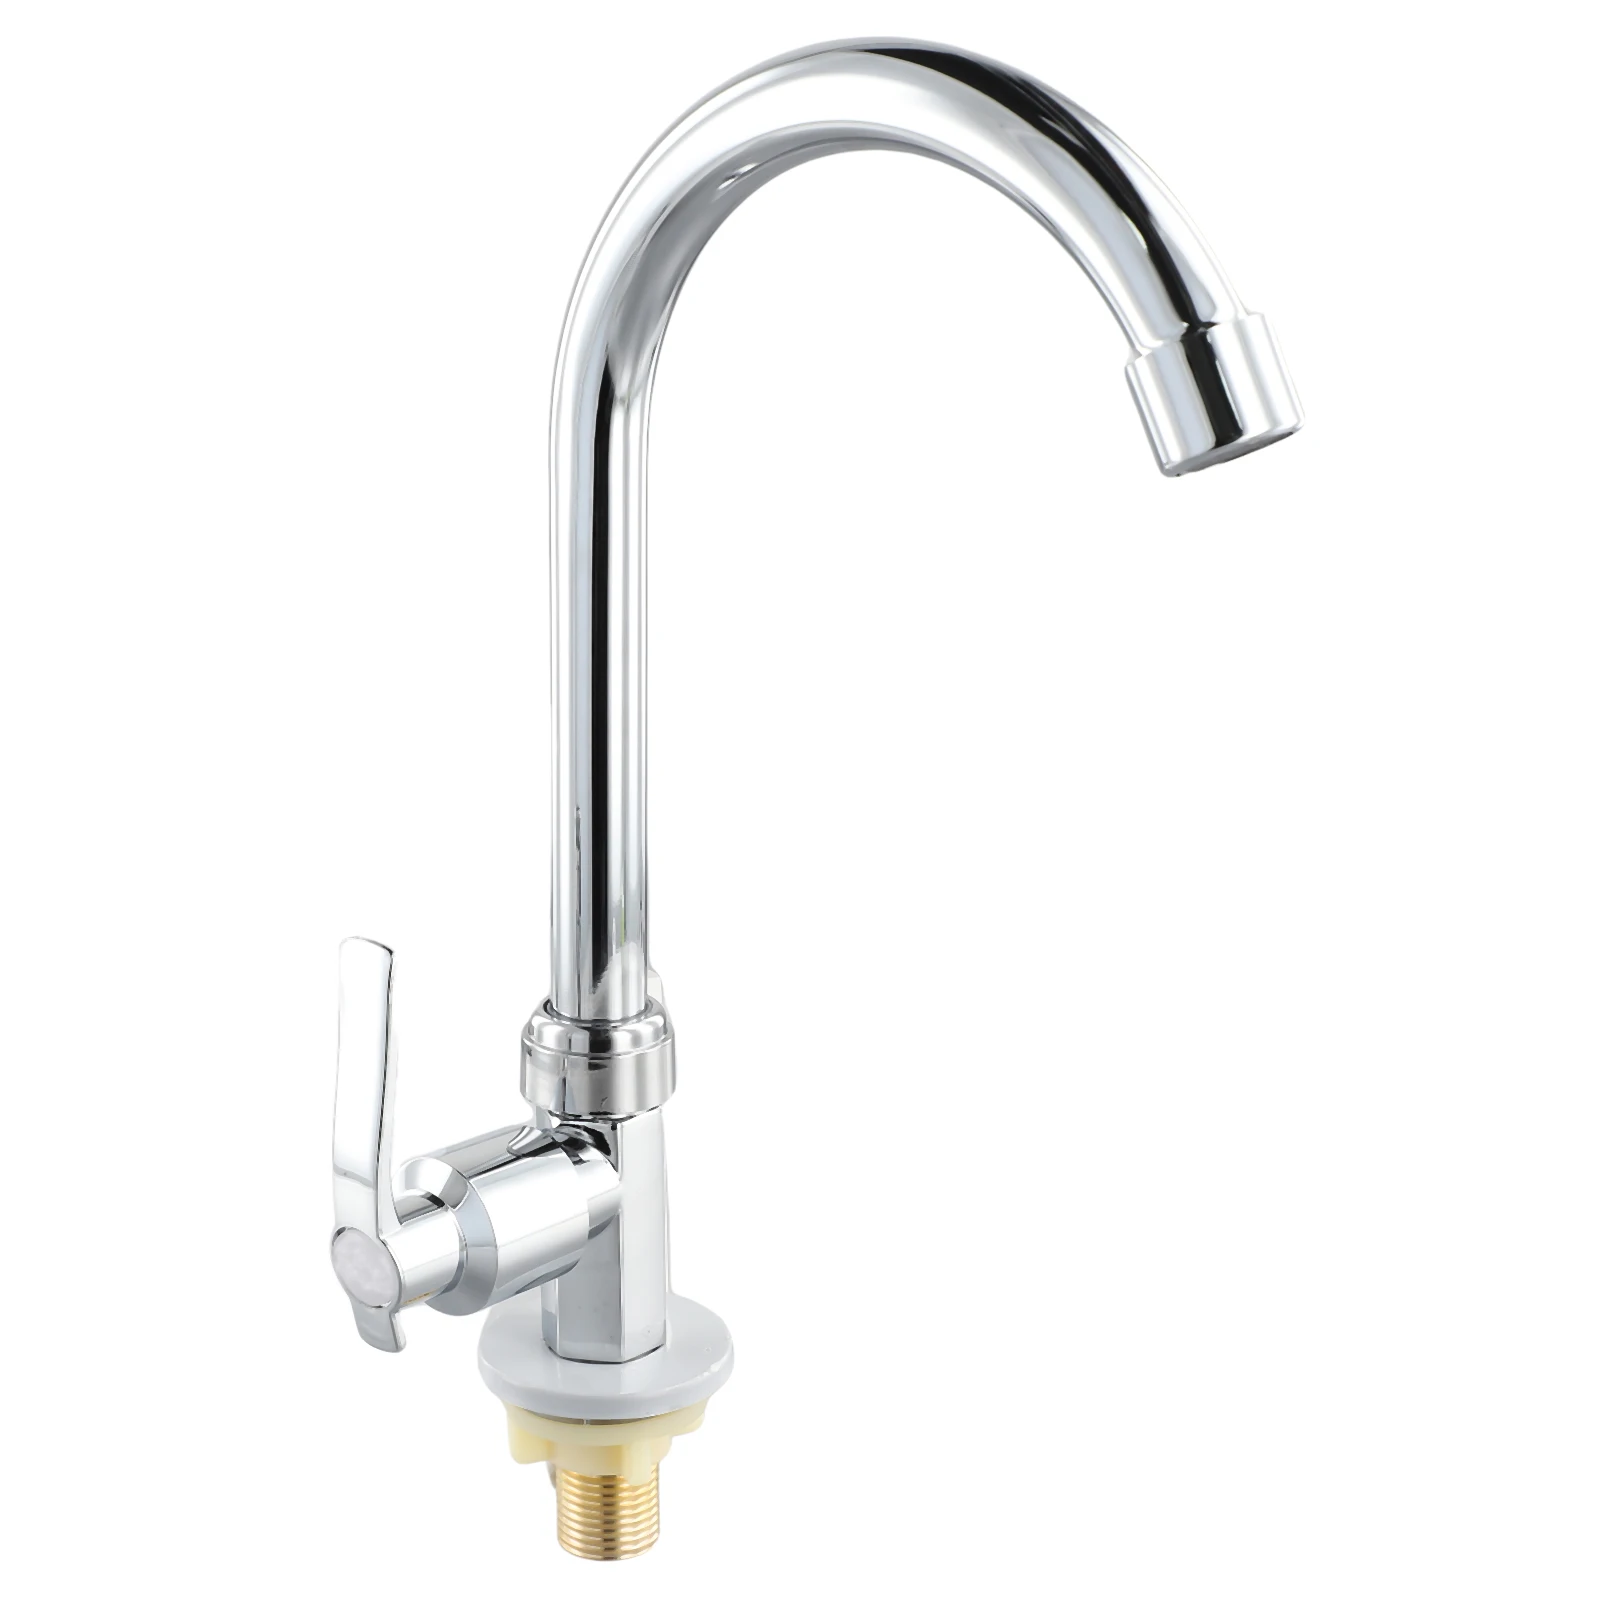 Swivel Spout Kitchen Faucet Kitchen Faucet Plating Silver Single Cold Water Stainless Steel Bars Bathrooms Parts 3